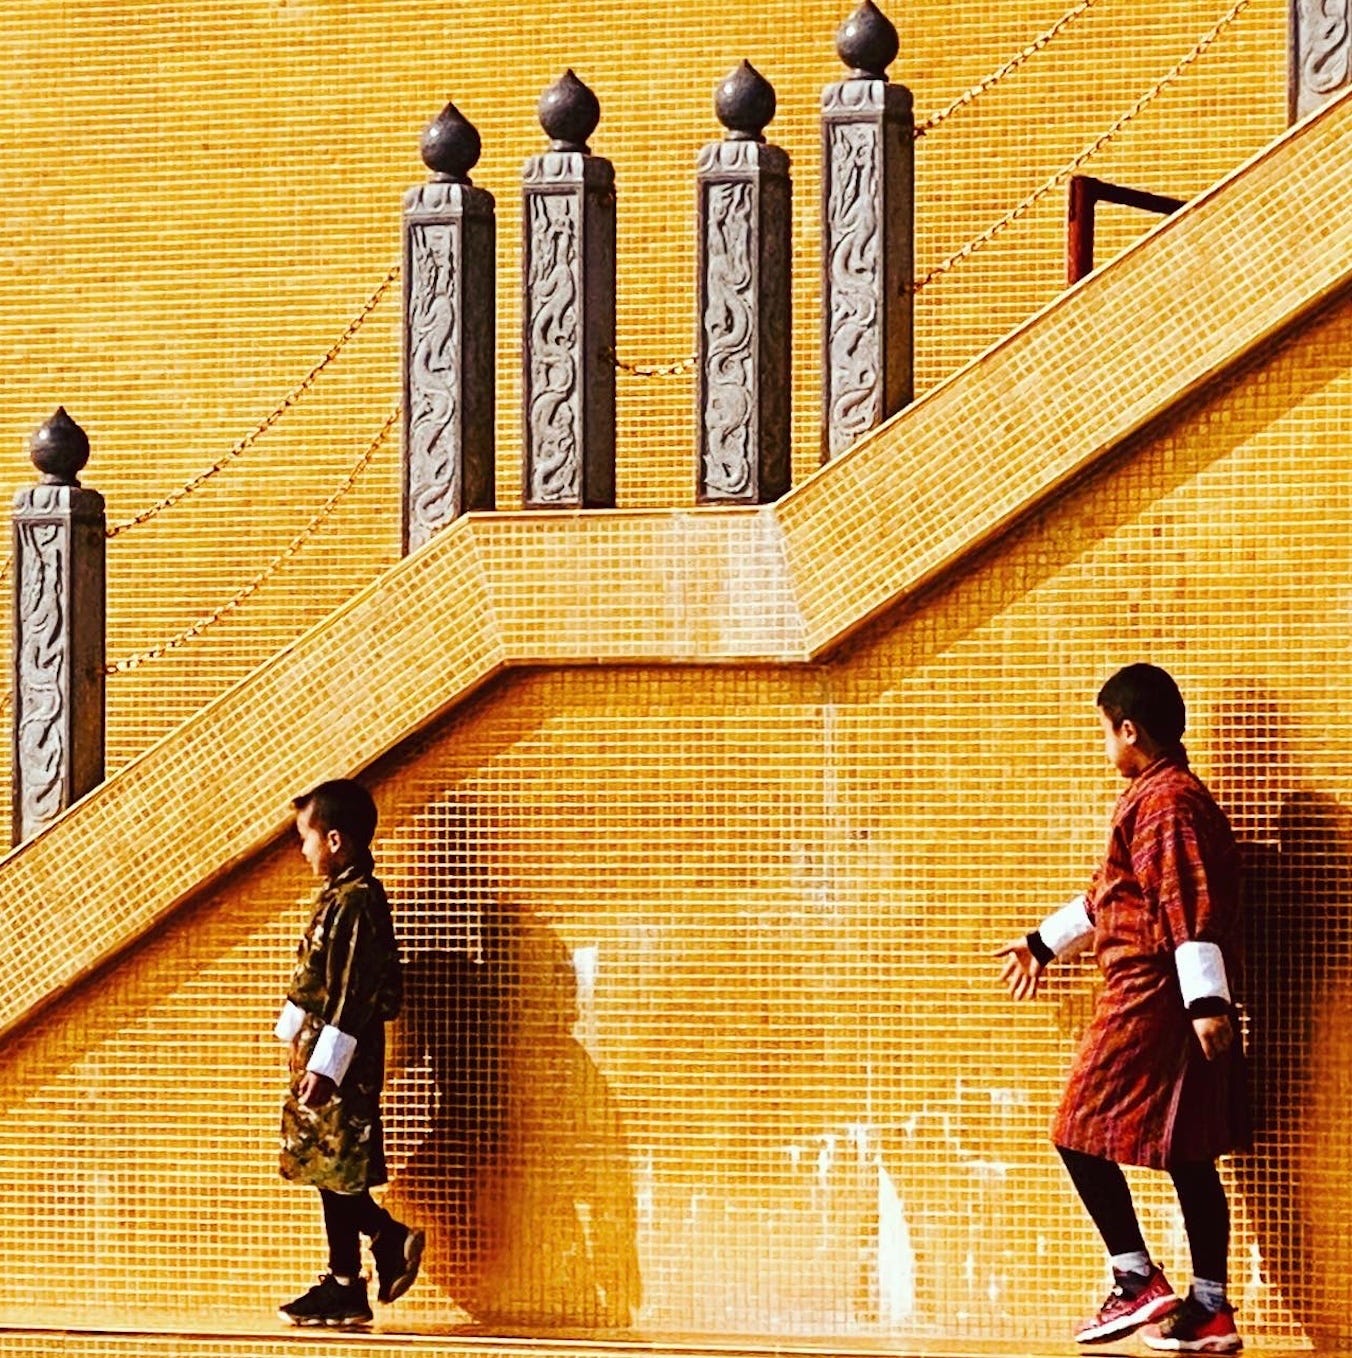 Two young boys, dressed in traditional robes, walk past a gold temple.